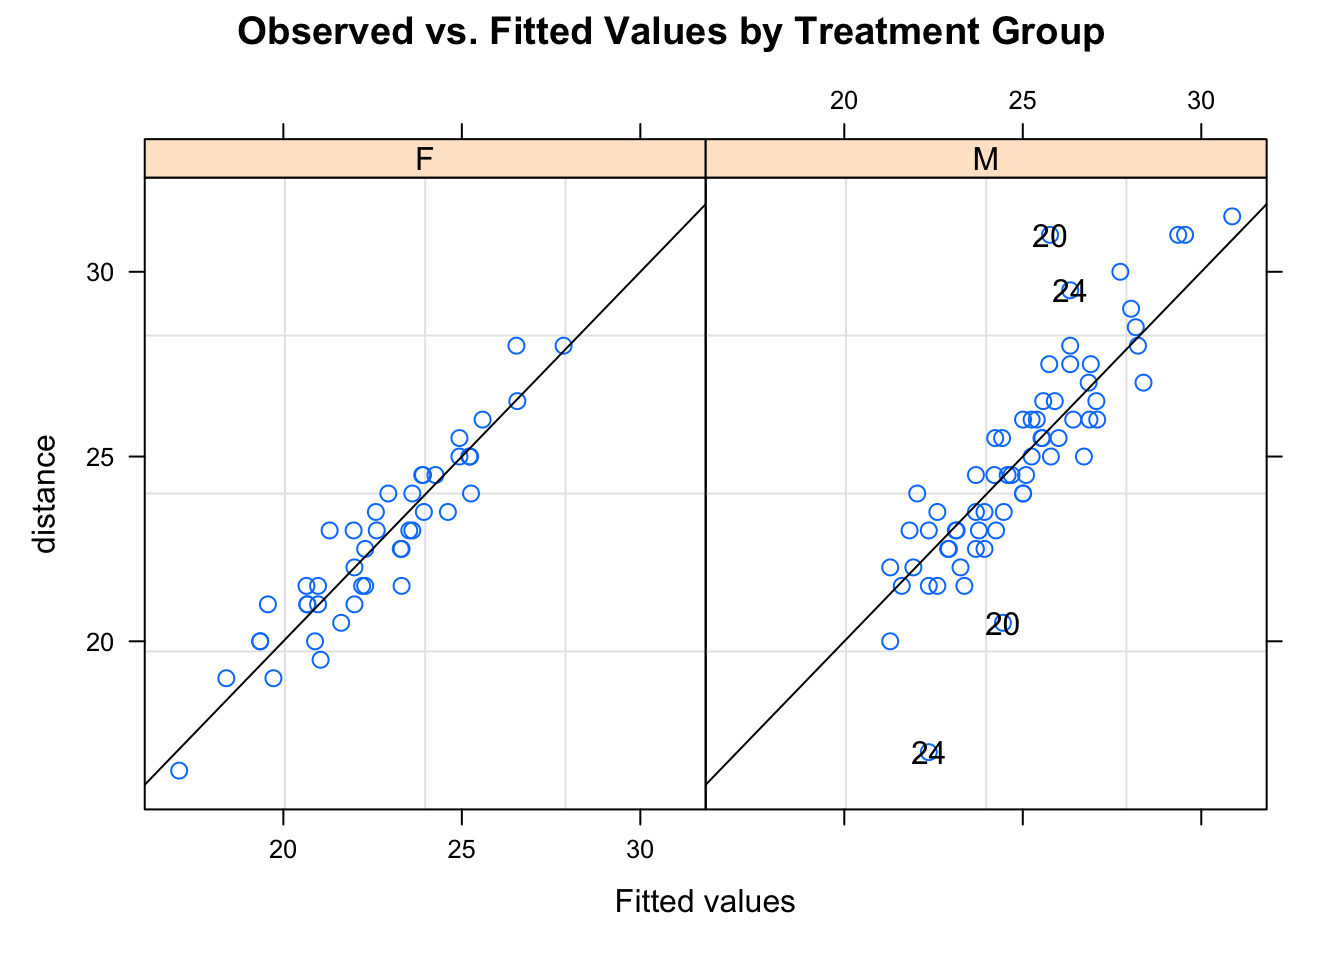 Plot for assessing linearity within each treatment group.